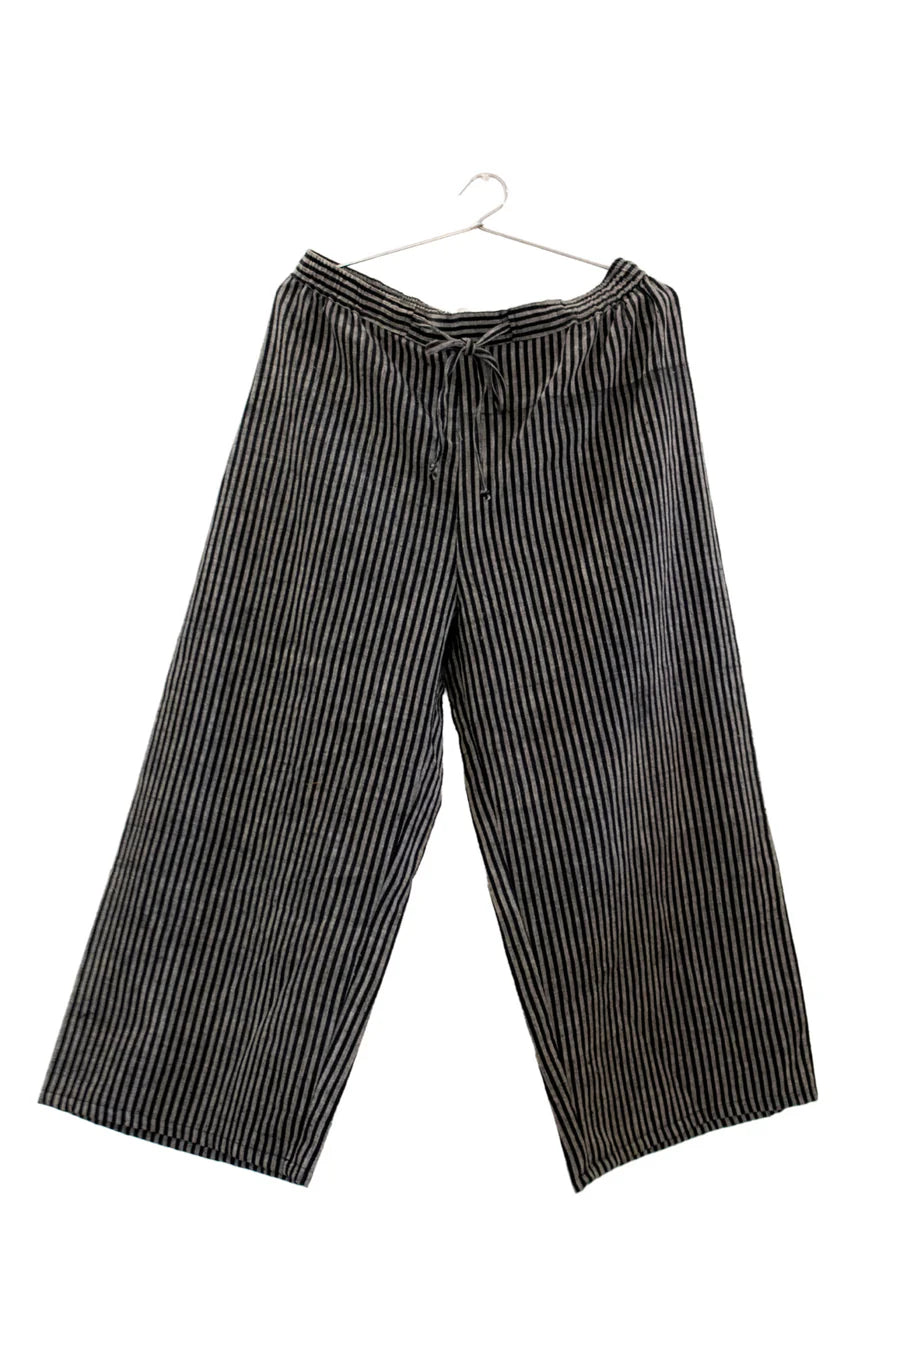 Black Striped Pants by Araayeh with Artisan Made, Black, Casual Wear, Handwoven Cotton, Pants, Relaxed Fit, Stripes at Kamakhyaa for sustainable fashion